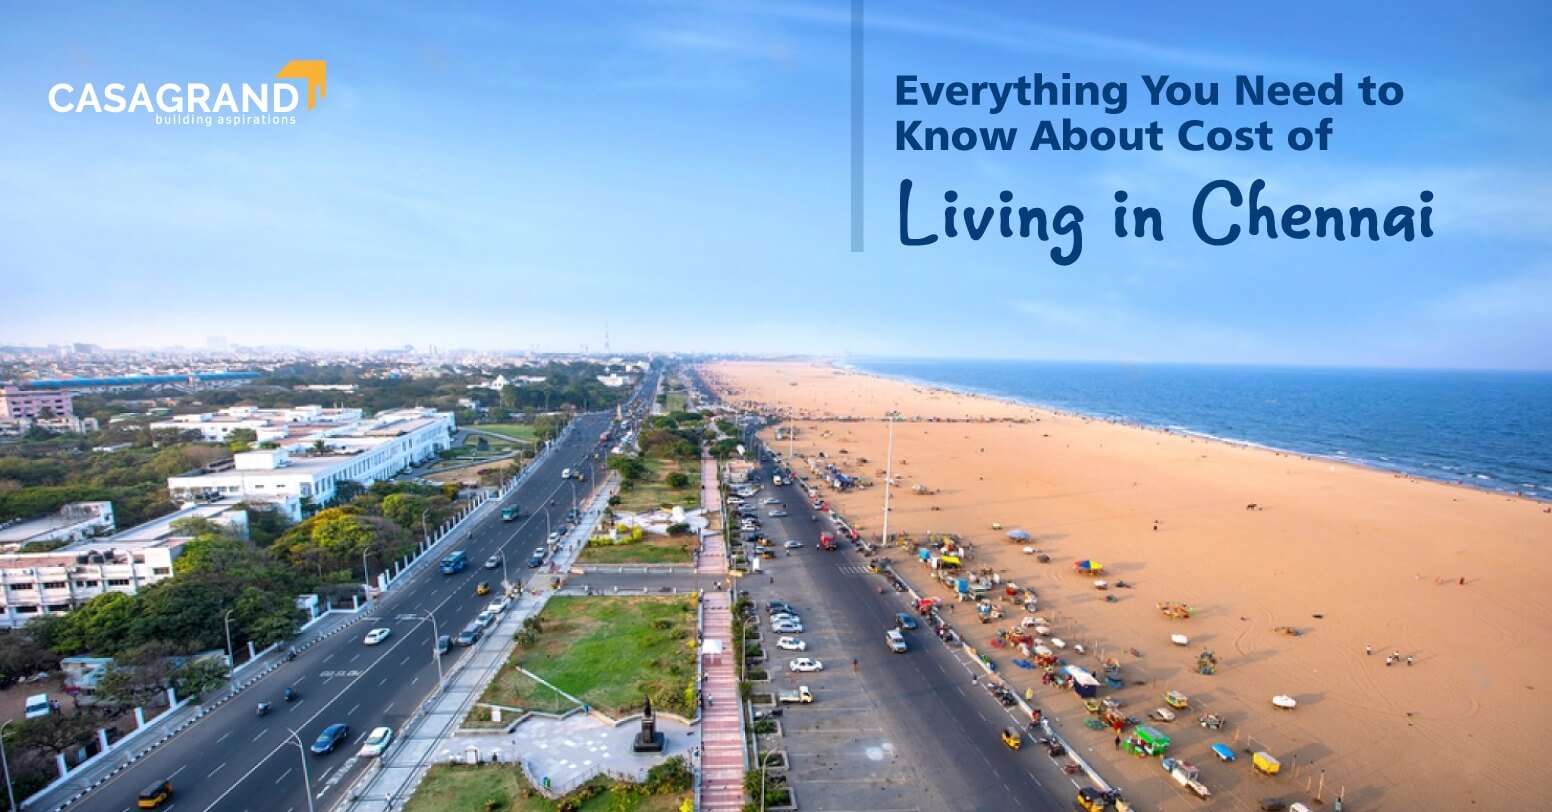 Everything You Need to Know About Cost of Living in Chennai